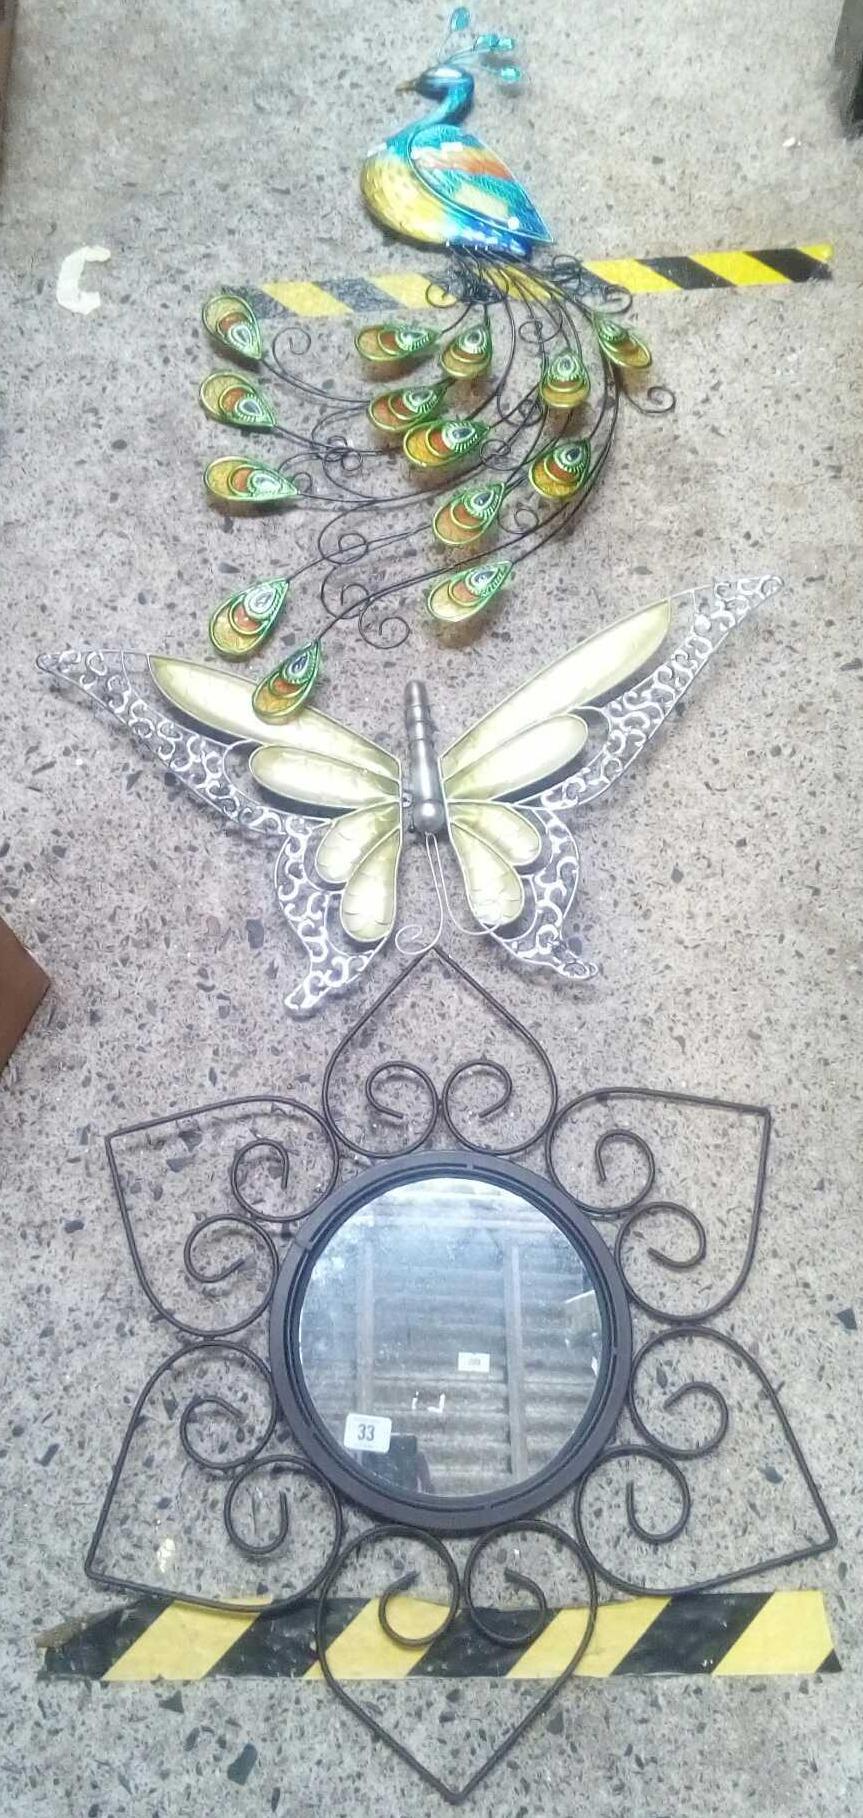 ROUND METAL MIRROR & 2 METAL WALL DECORATIONS - A BUTTERFLY & PEACOCK